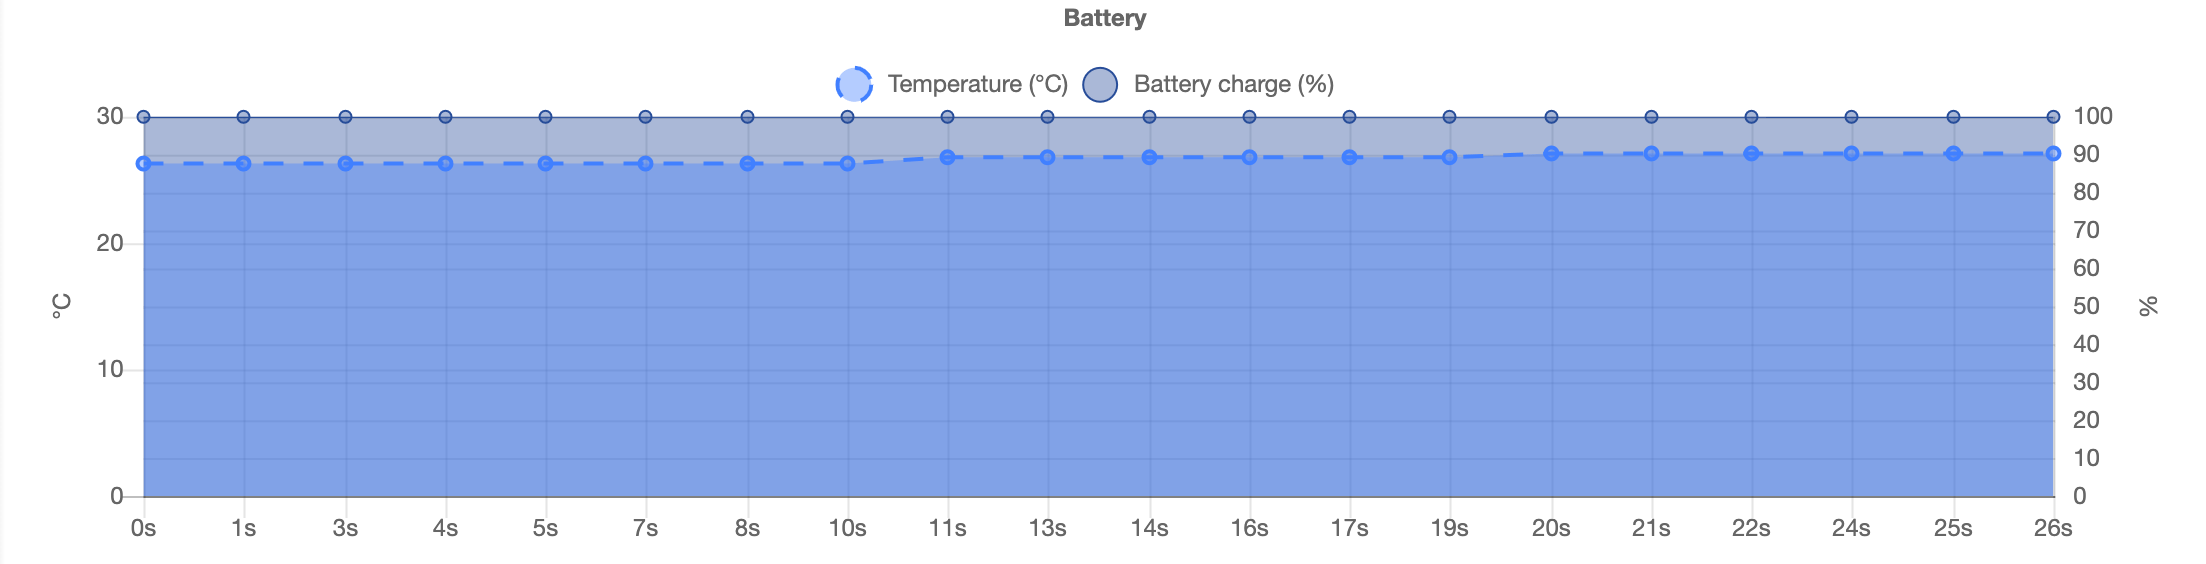 Battery Consumption Bar Graph of Application on the real device